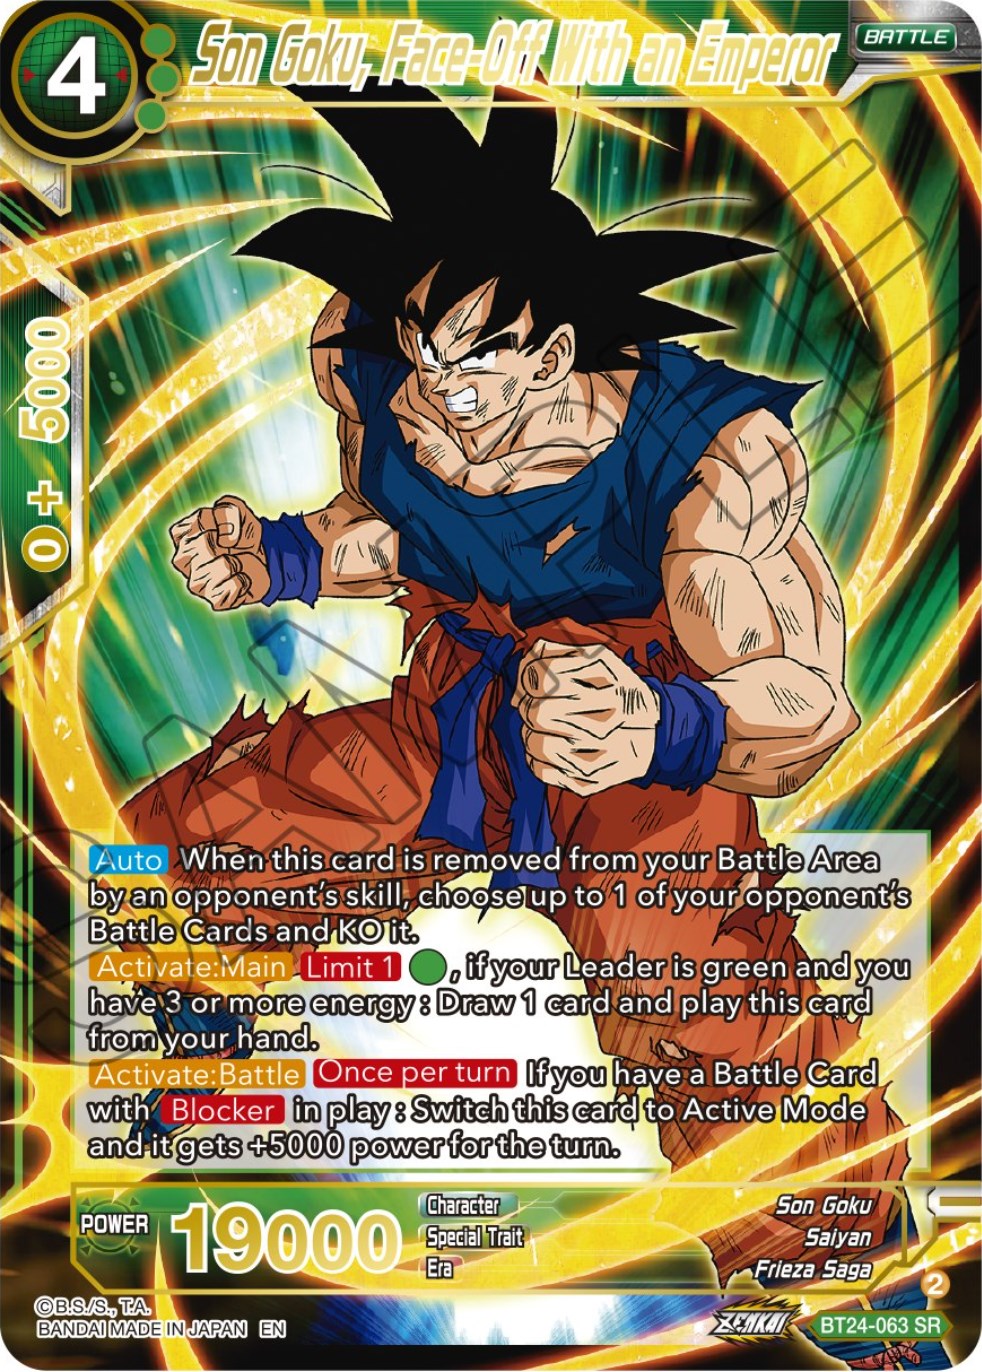 Son Goku, Face-Off With an Emperor (BT24-063) [Beyond Generations] | Amazing Games TCG